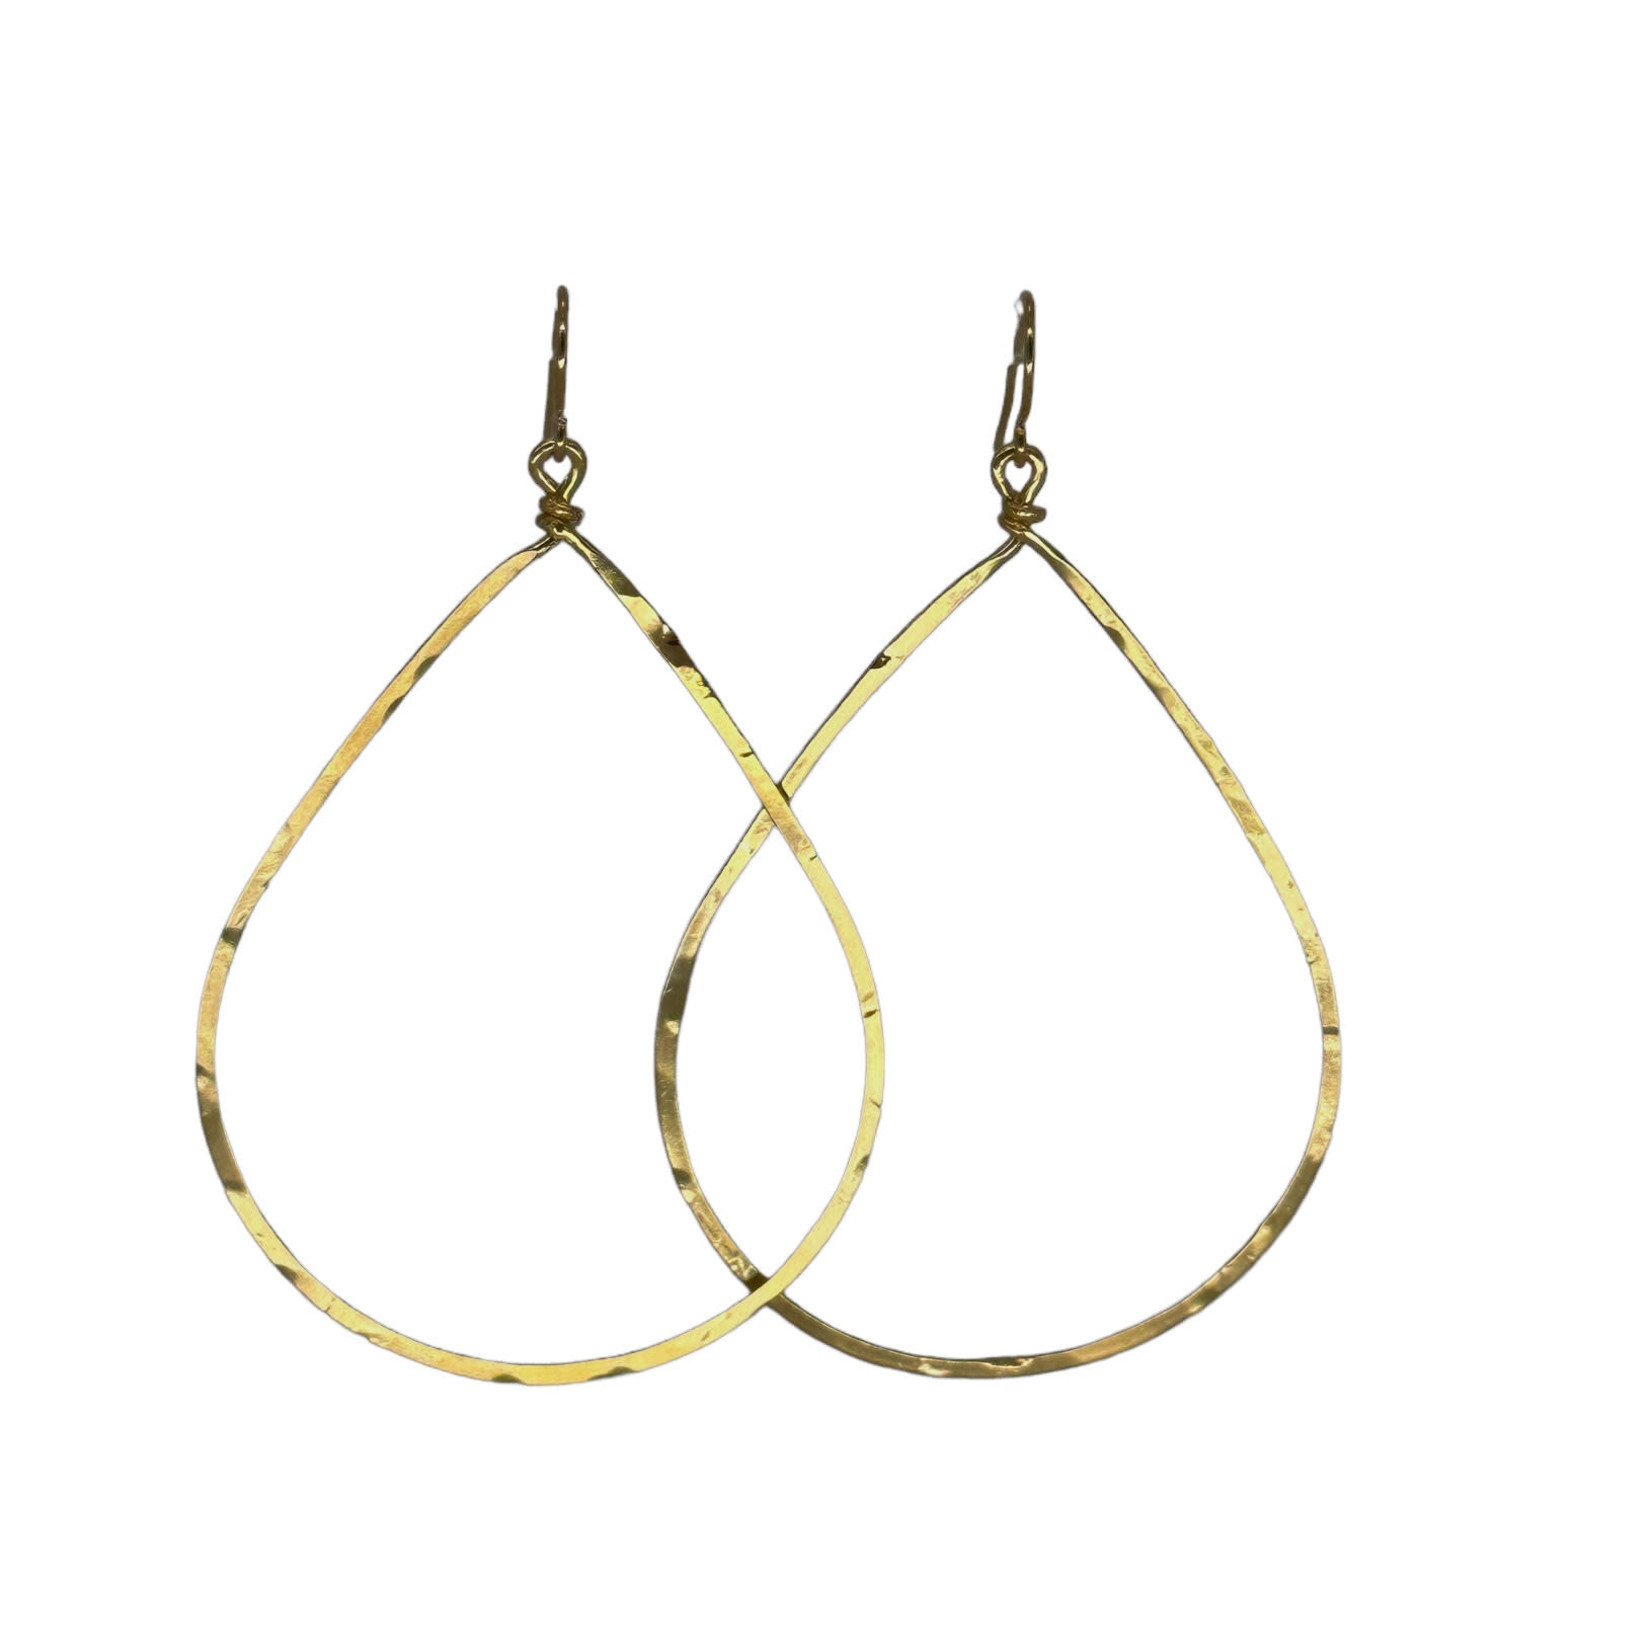 Lani Gold Plated Hammered Earrings Raindrop Large 3G